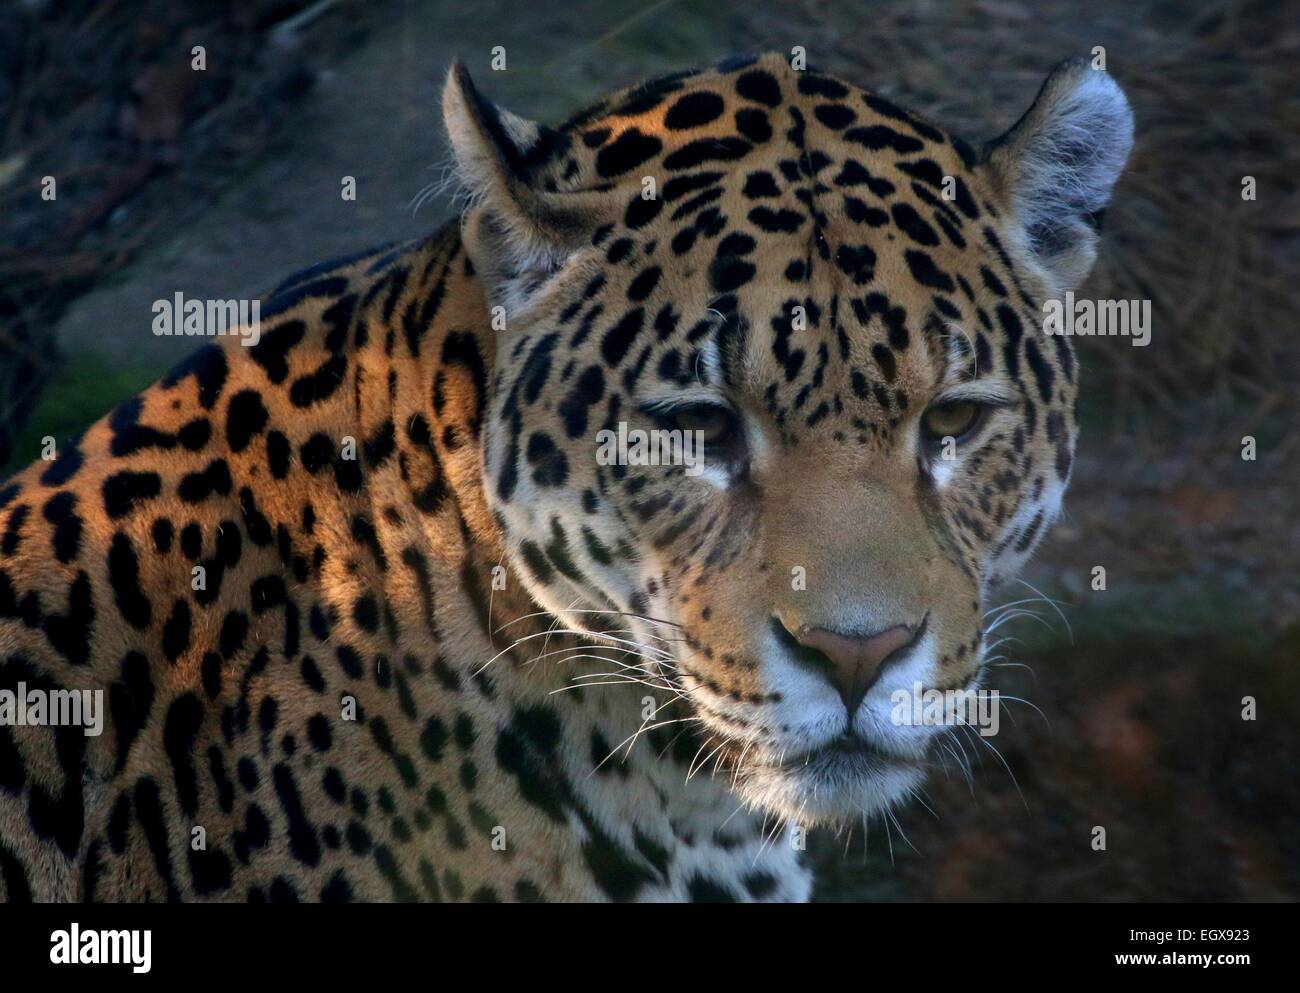 Female South American  Jaguar (Panthera onca), close-up of the head Stock Photo